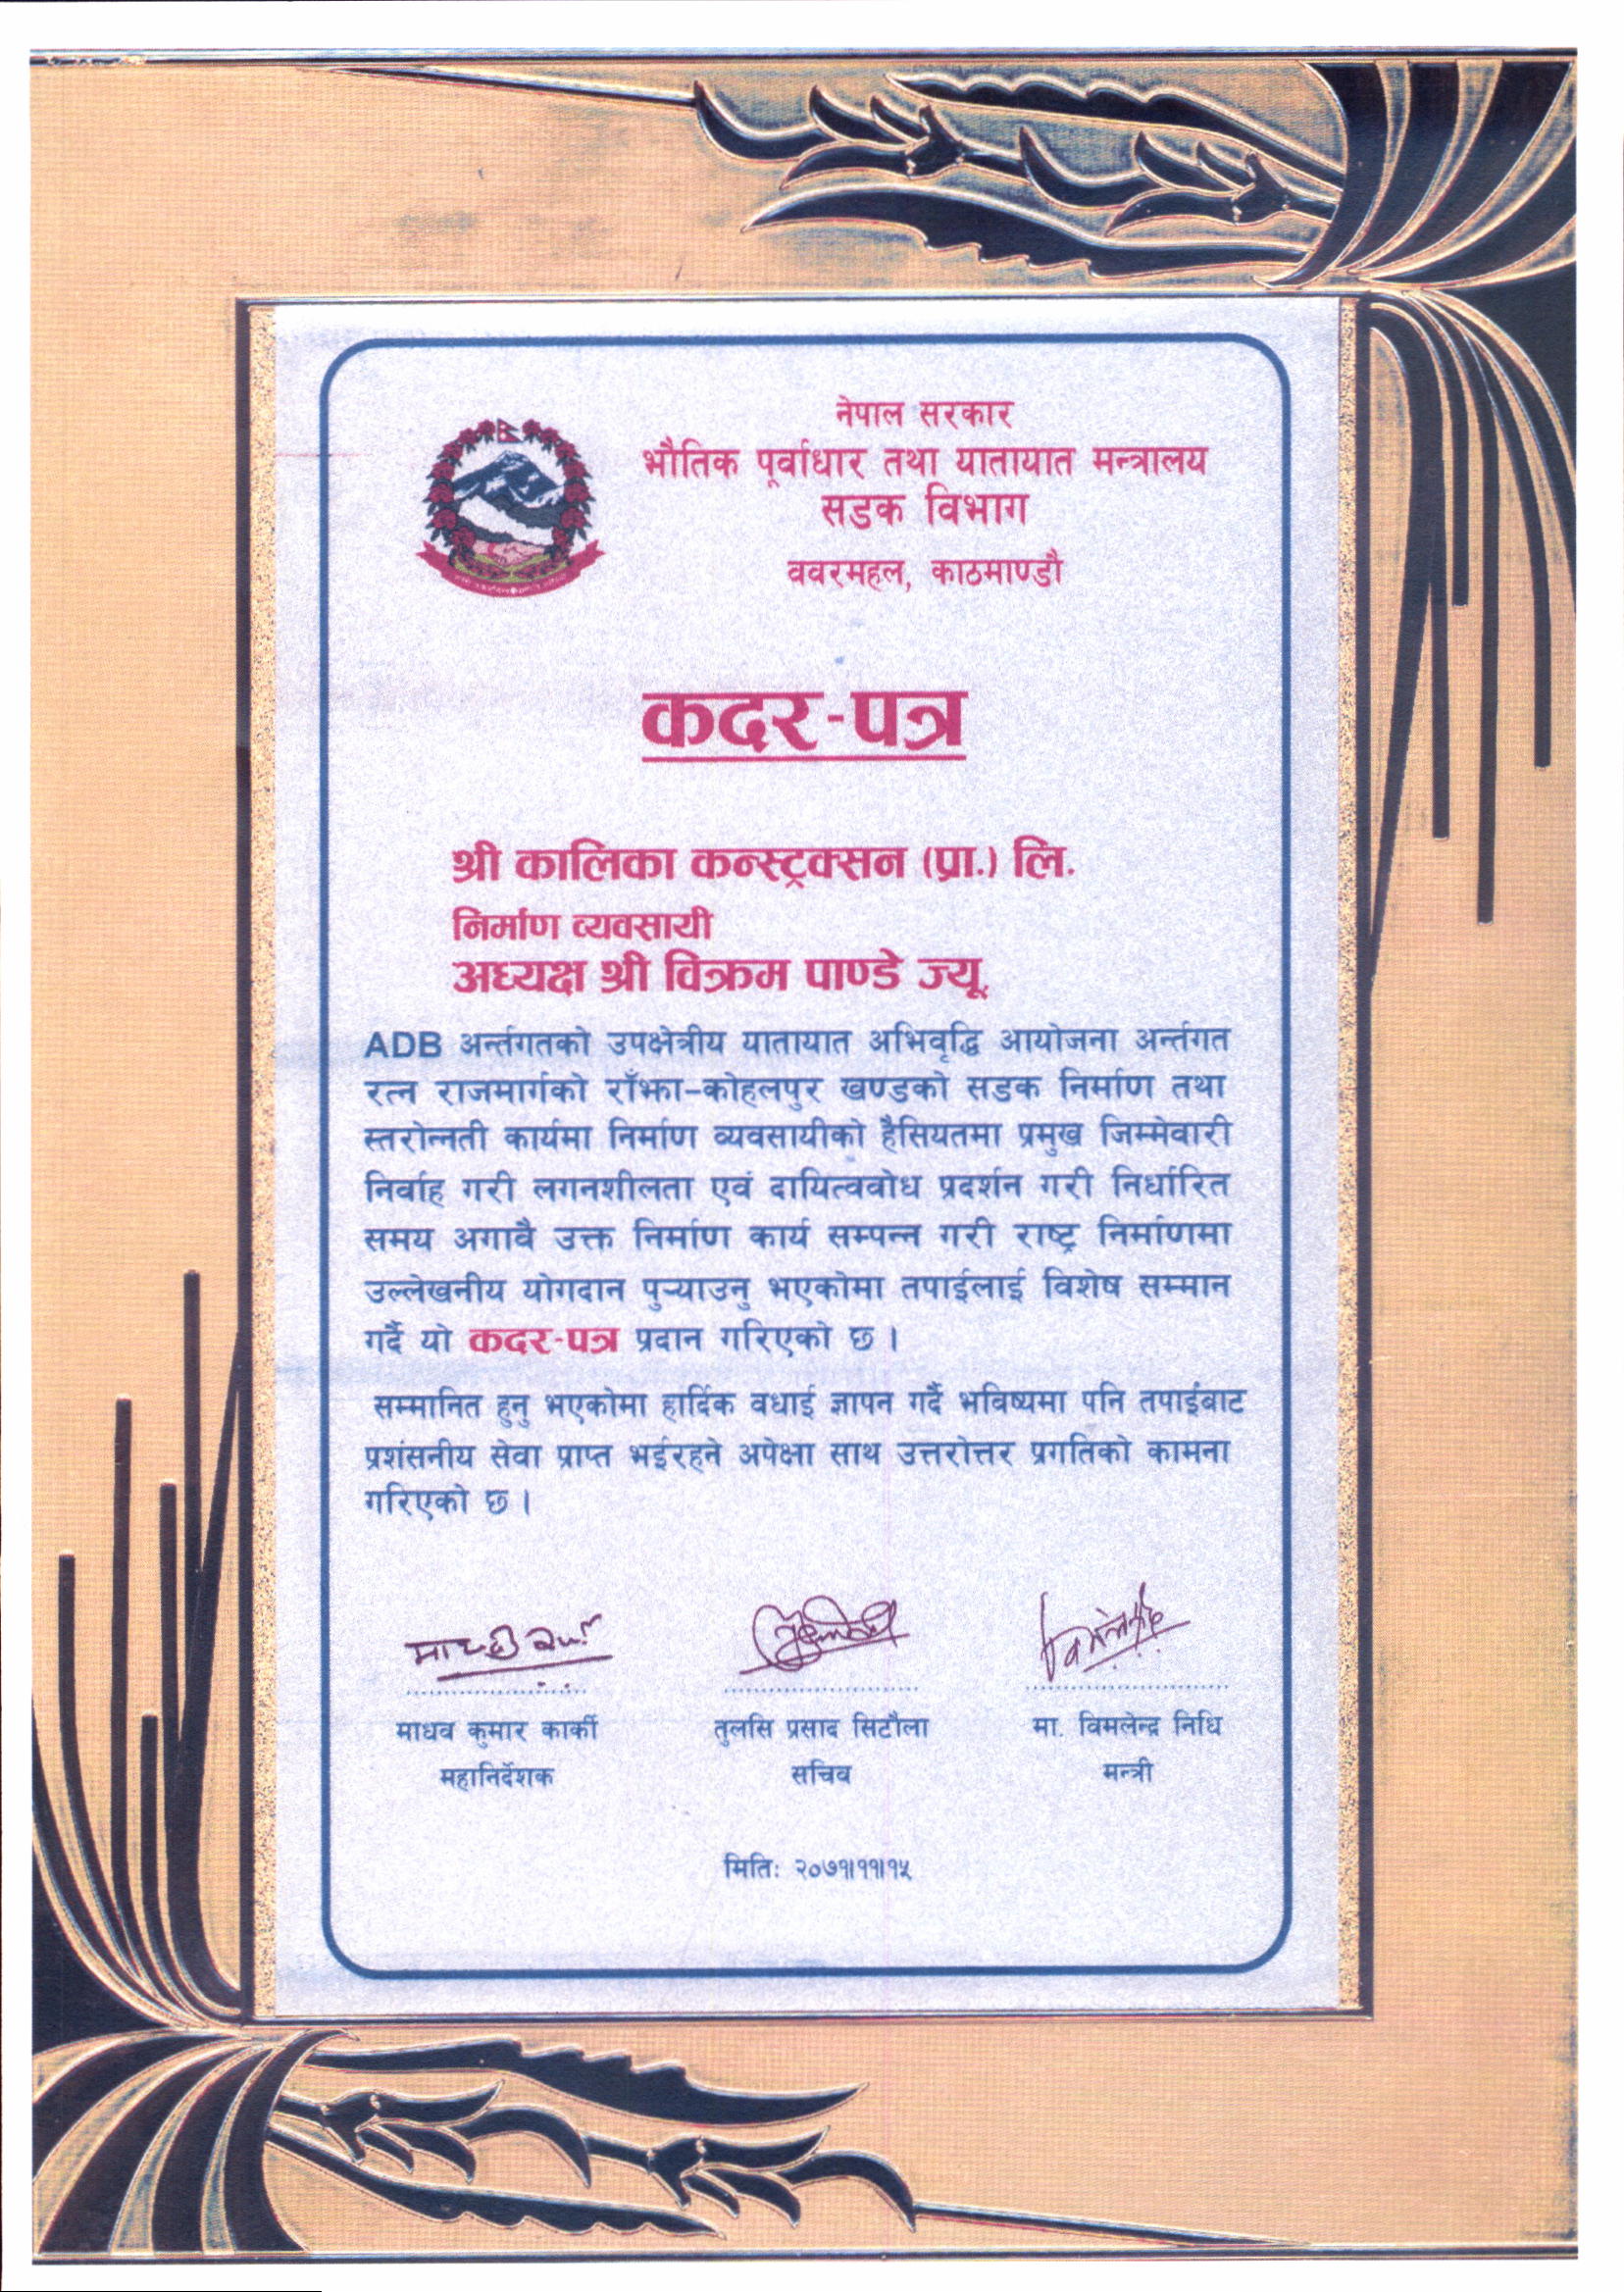 Recognition letter from Government of Nepal